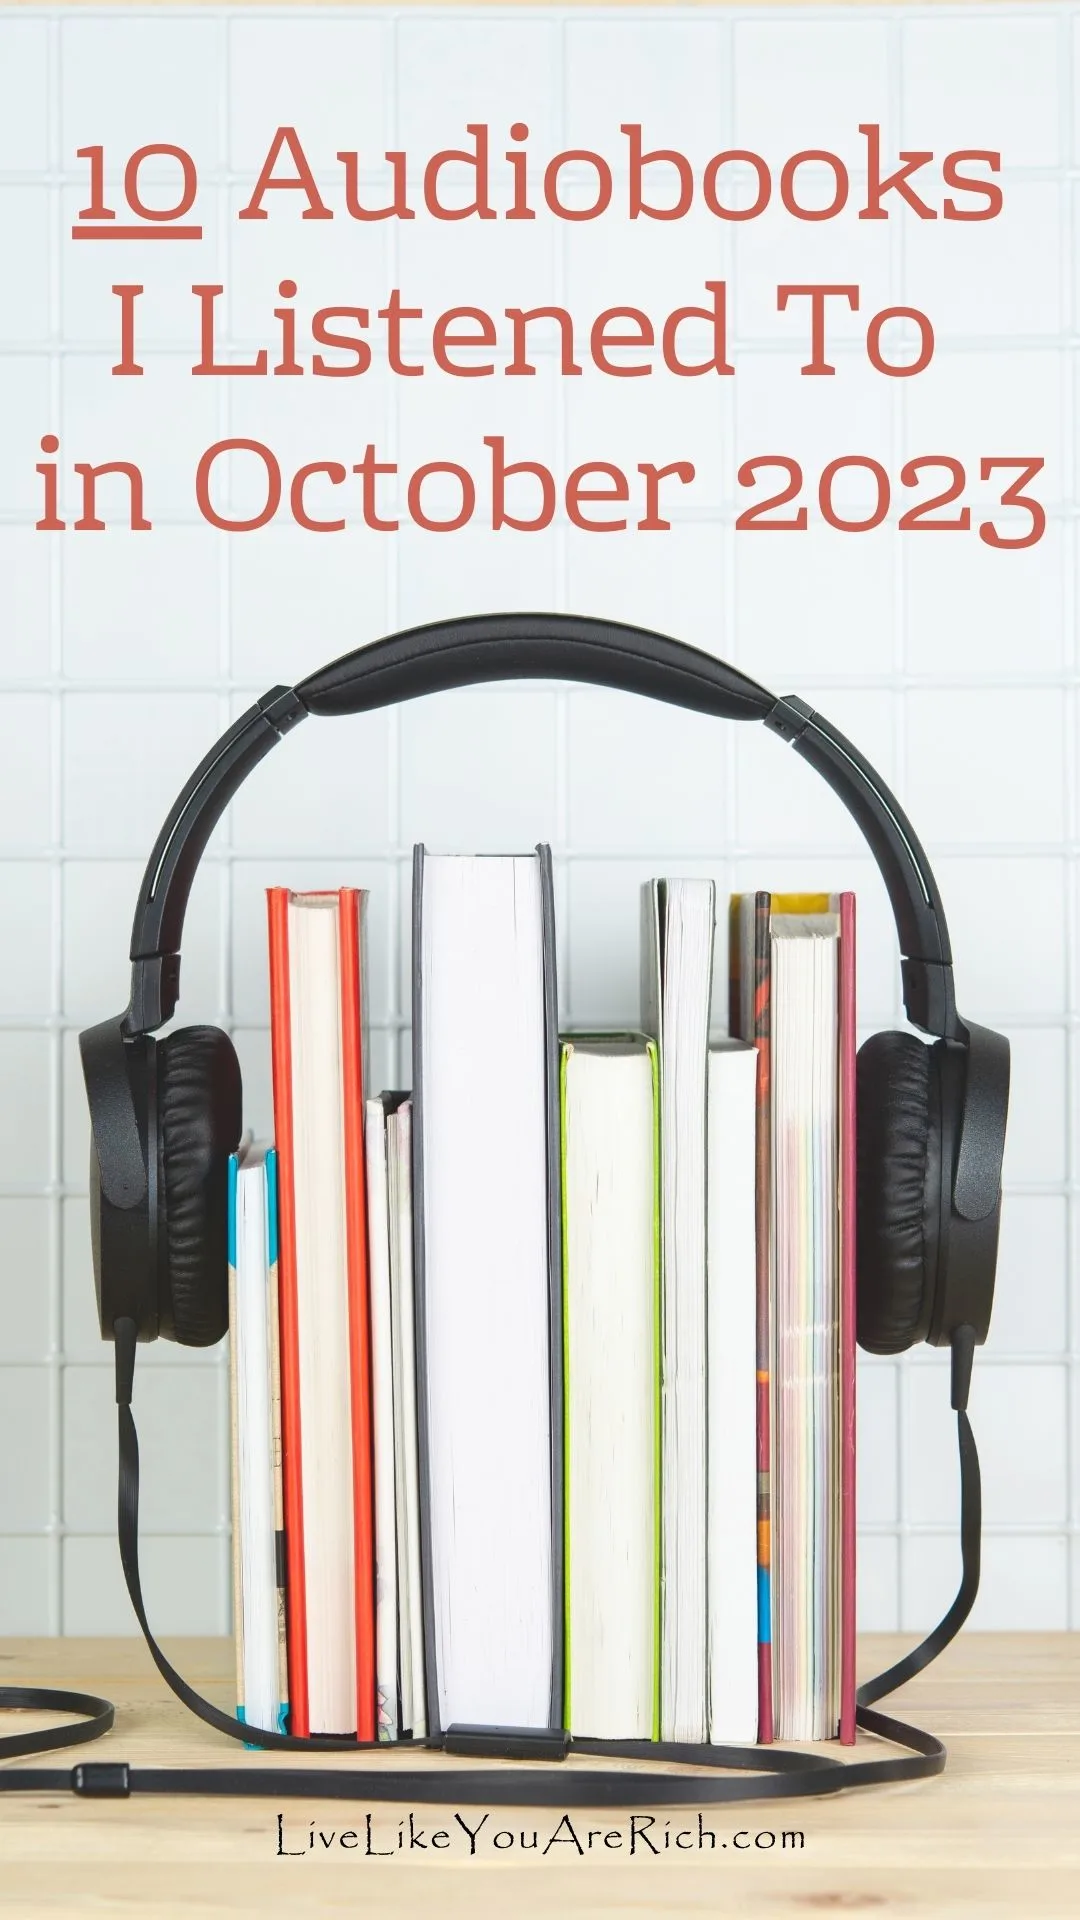 10 Audiobooks I Listened to in October 2023